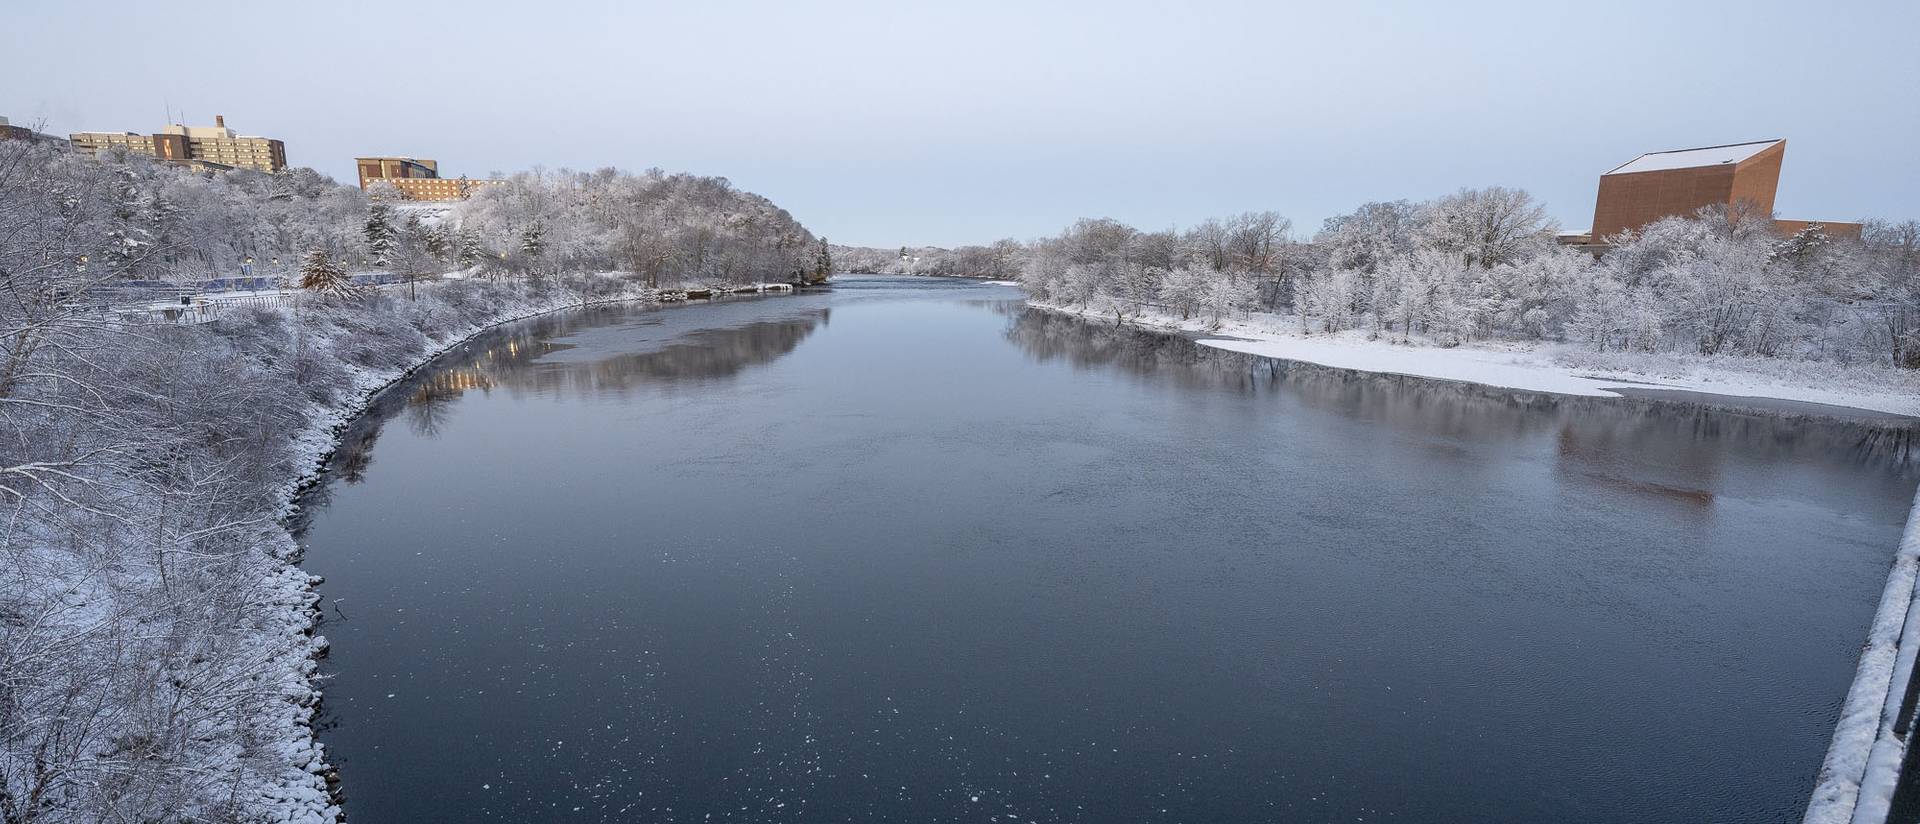 The Chippewa River in winter, with snow on the trees and buildings lining both sides of the river